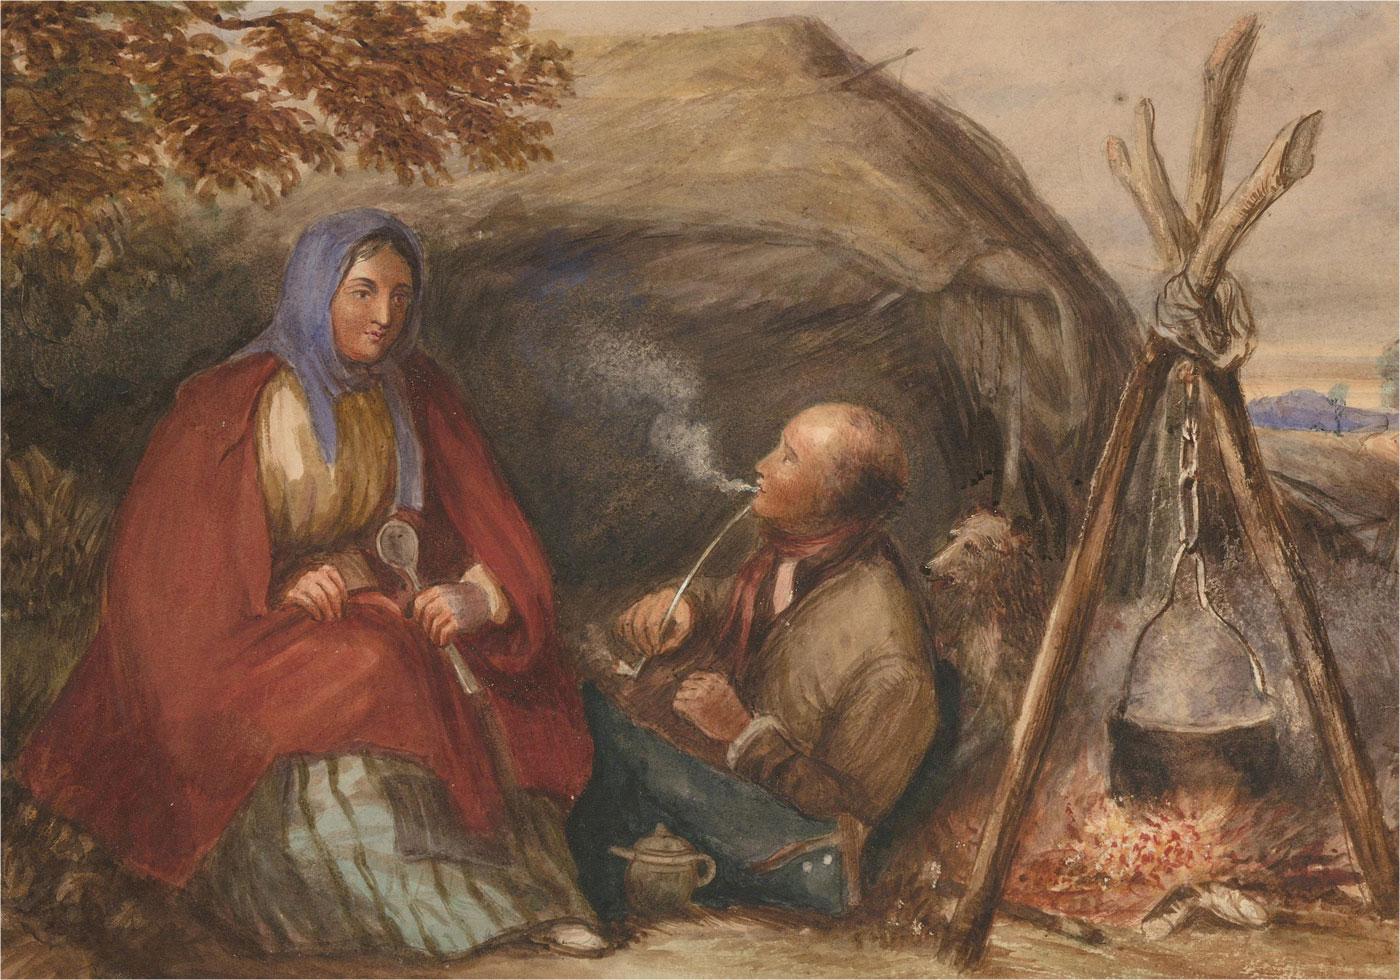 Unknown Figurative Art - Mid 19th Century Watercolour - Travellers Beside a Fire